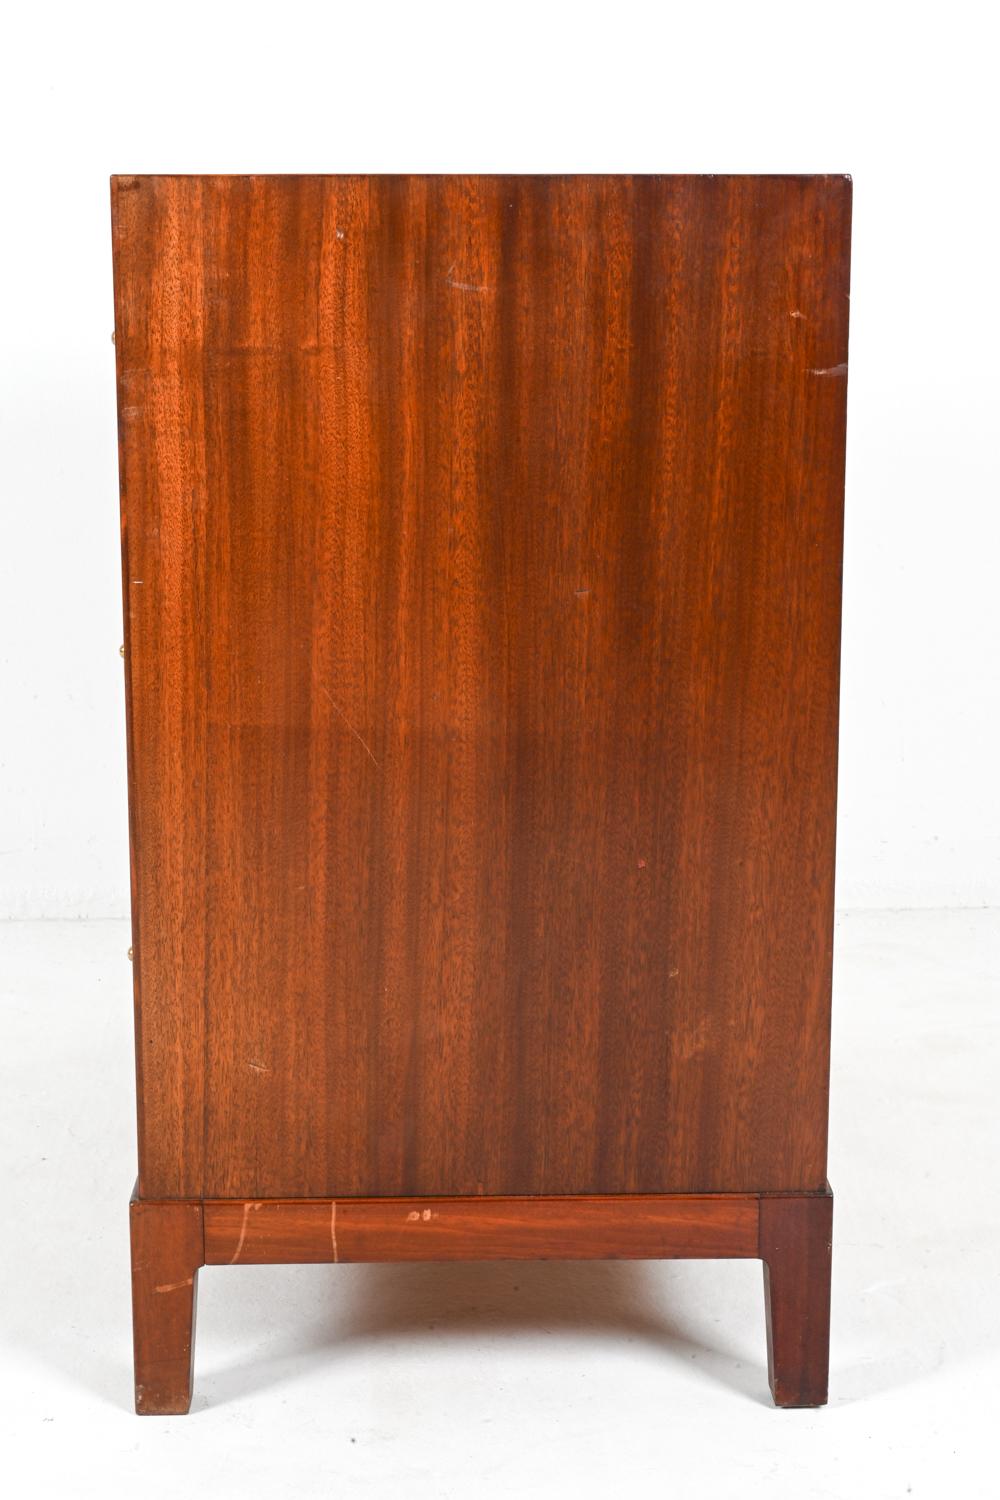 Rare Mahogany Three-Drawer Chest by Ole Wanscher for A. J. Iversen, c. 1940's For Sale 6